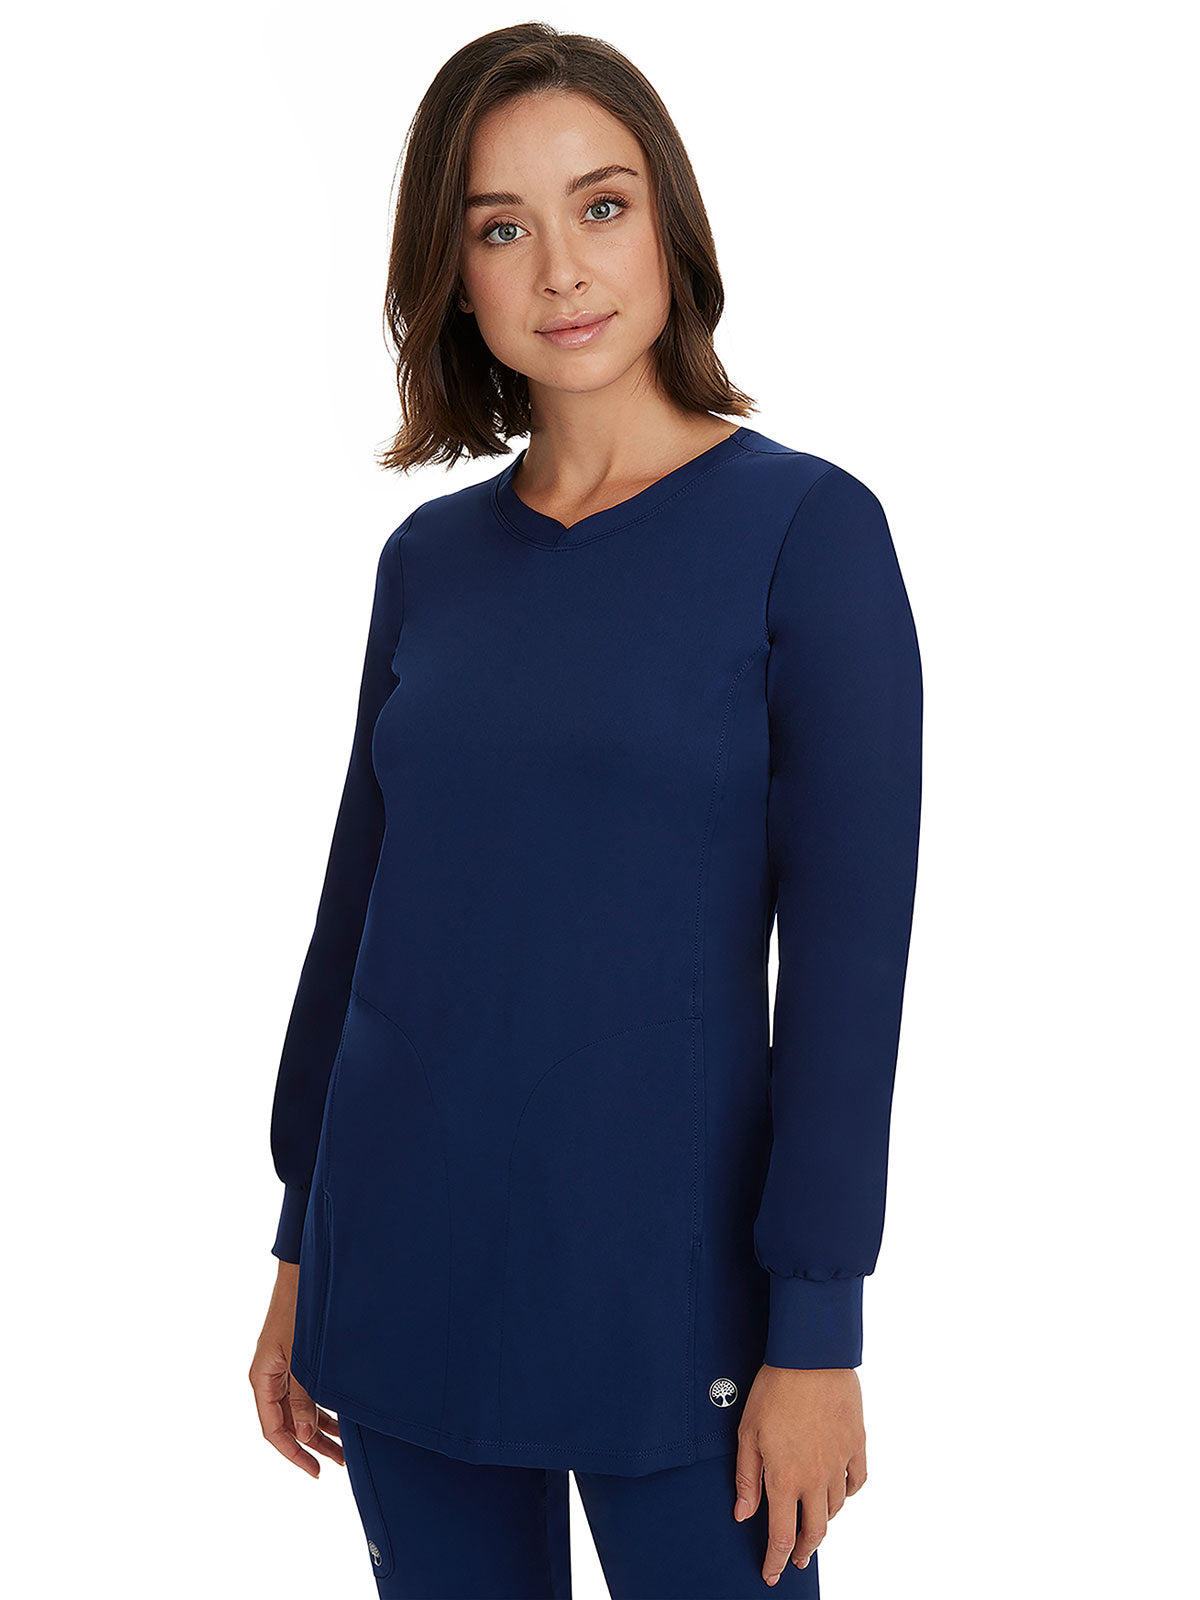 HH Works - Women's Fatima Long Sleeves Top